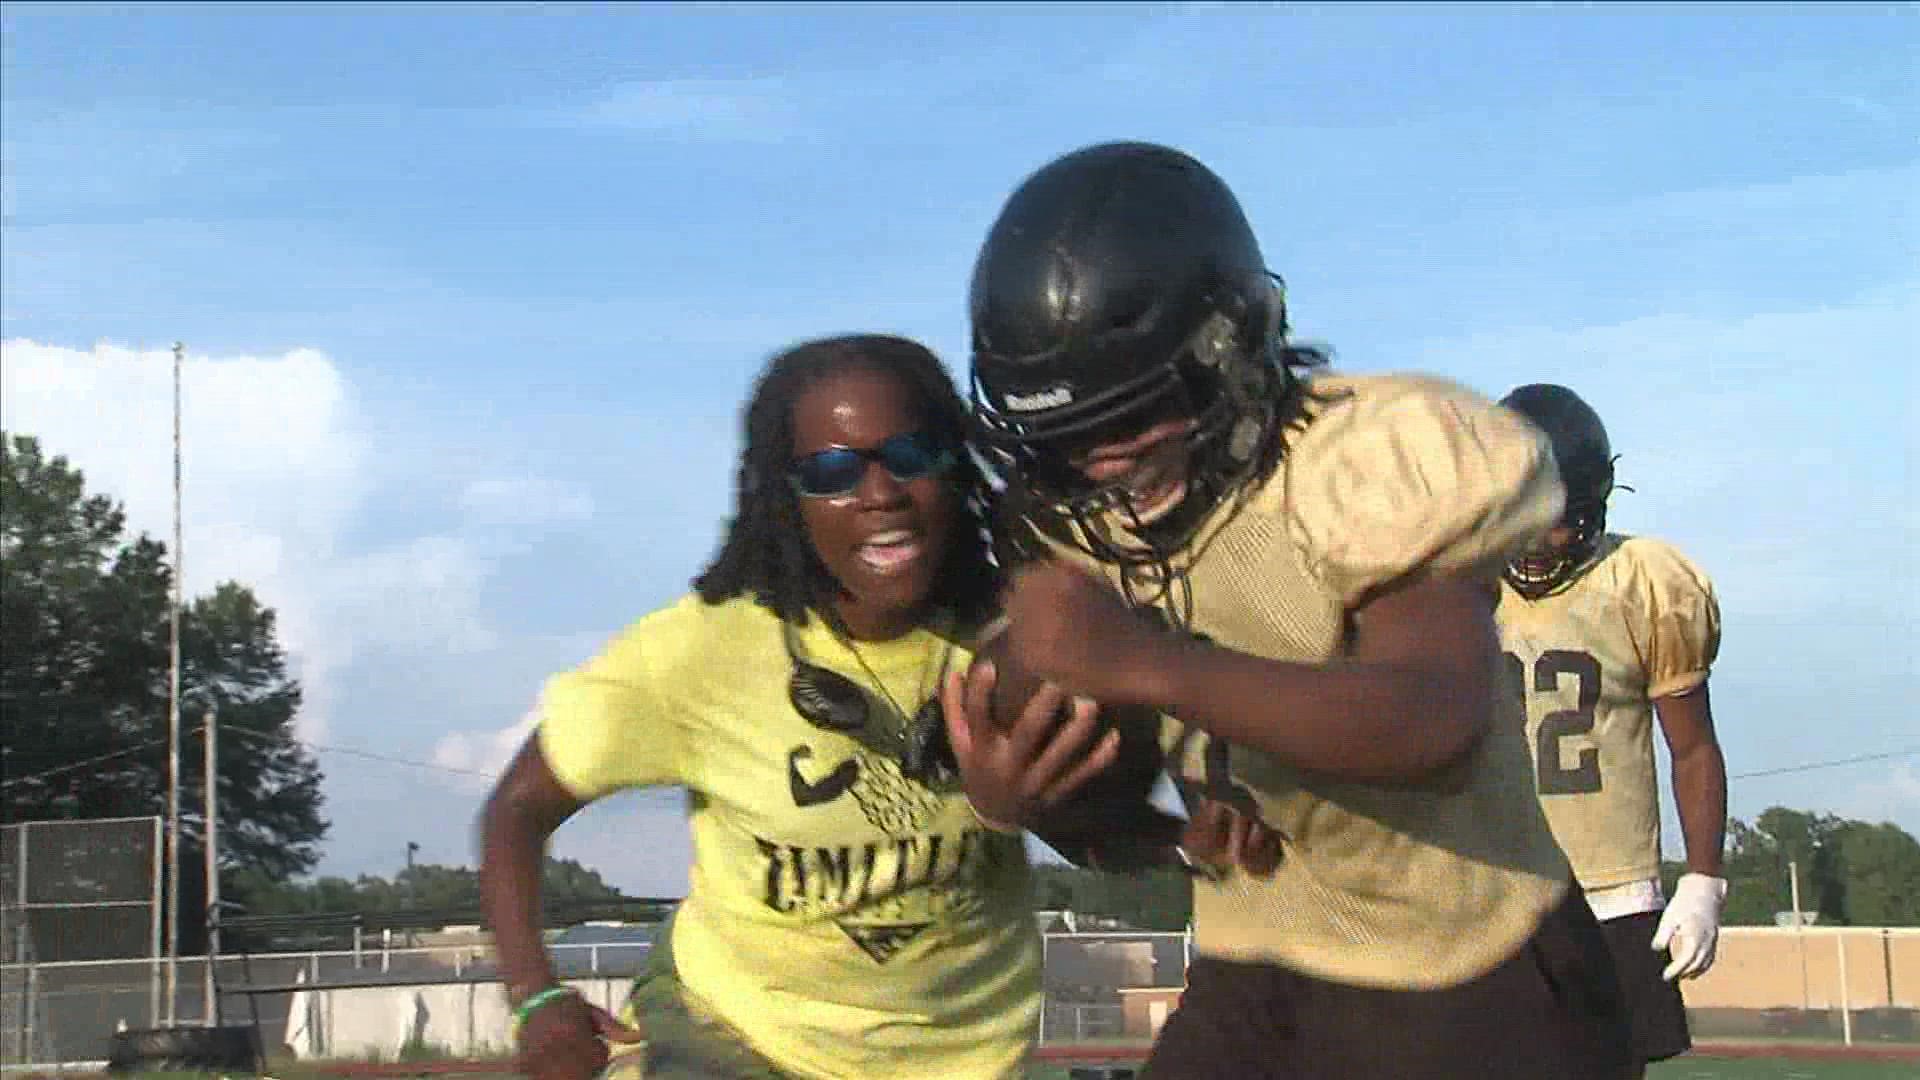 Burse, a Whitehaven alum, is in her first season as the Tigers running back coach.